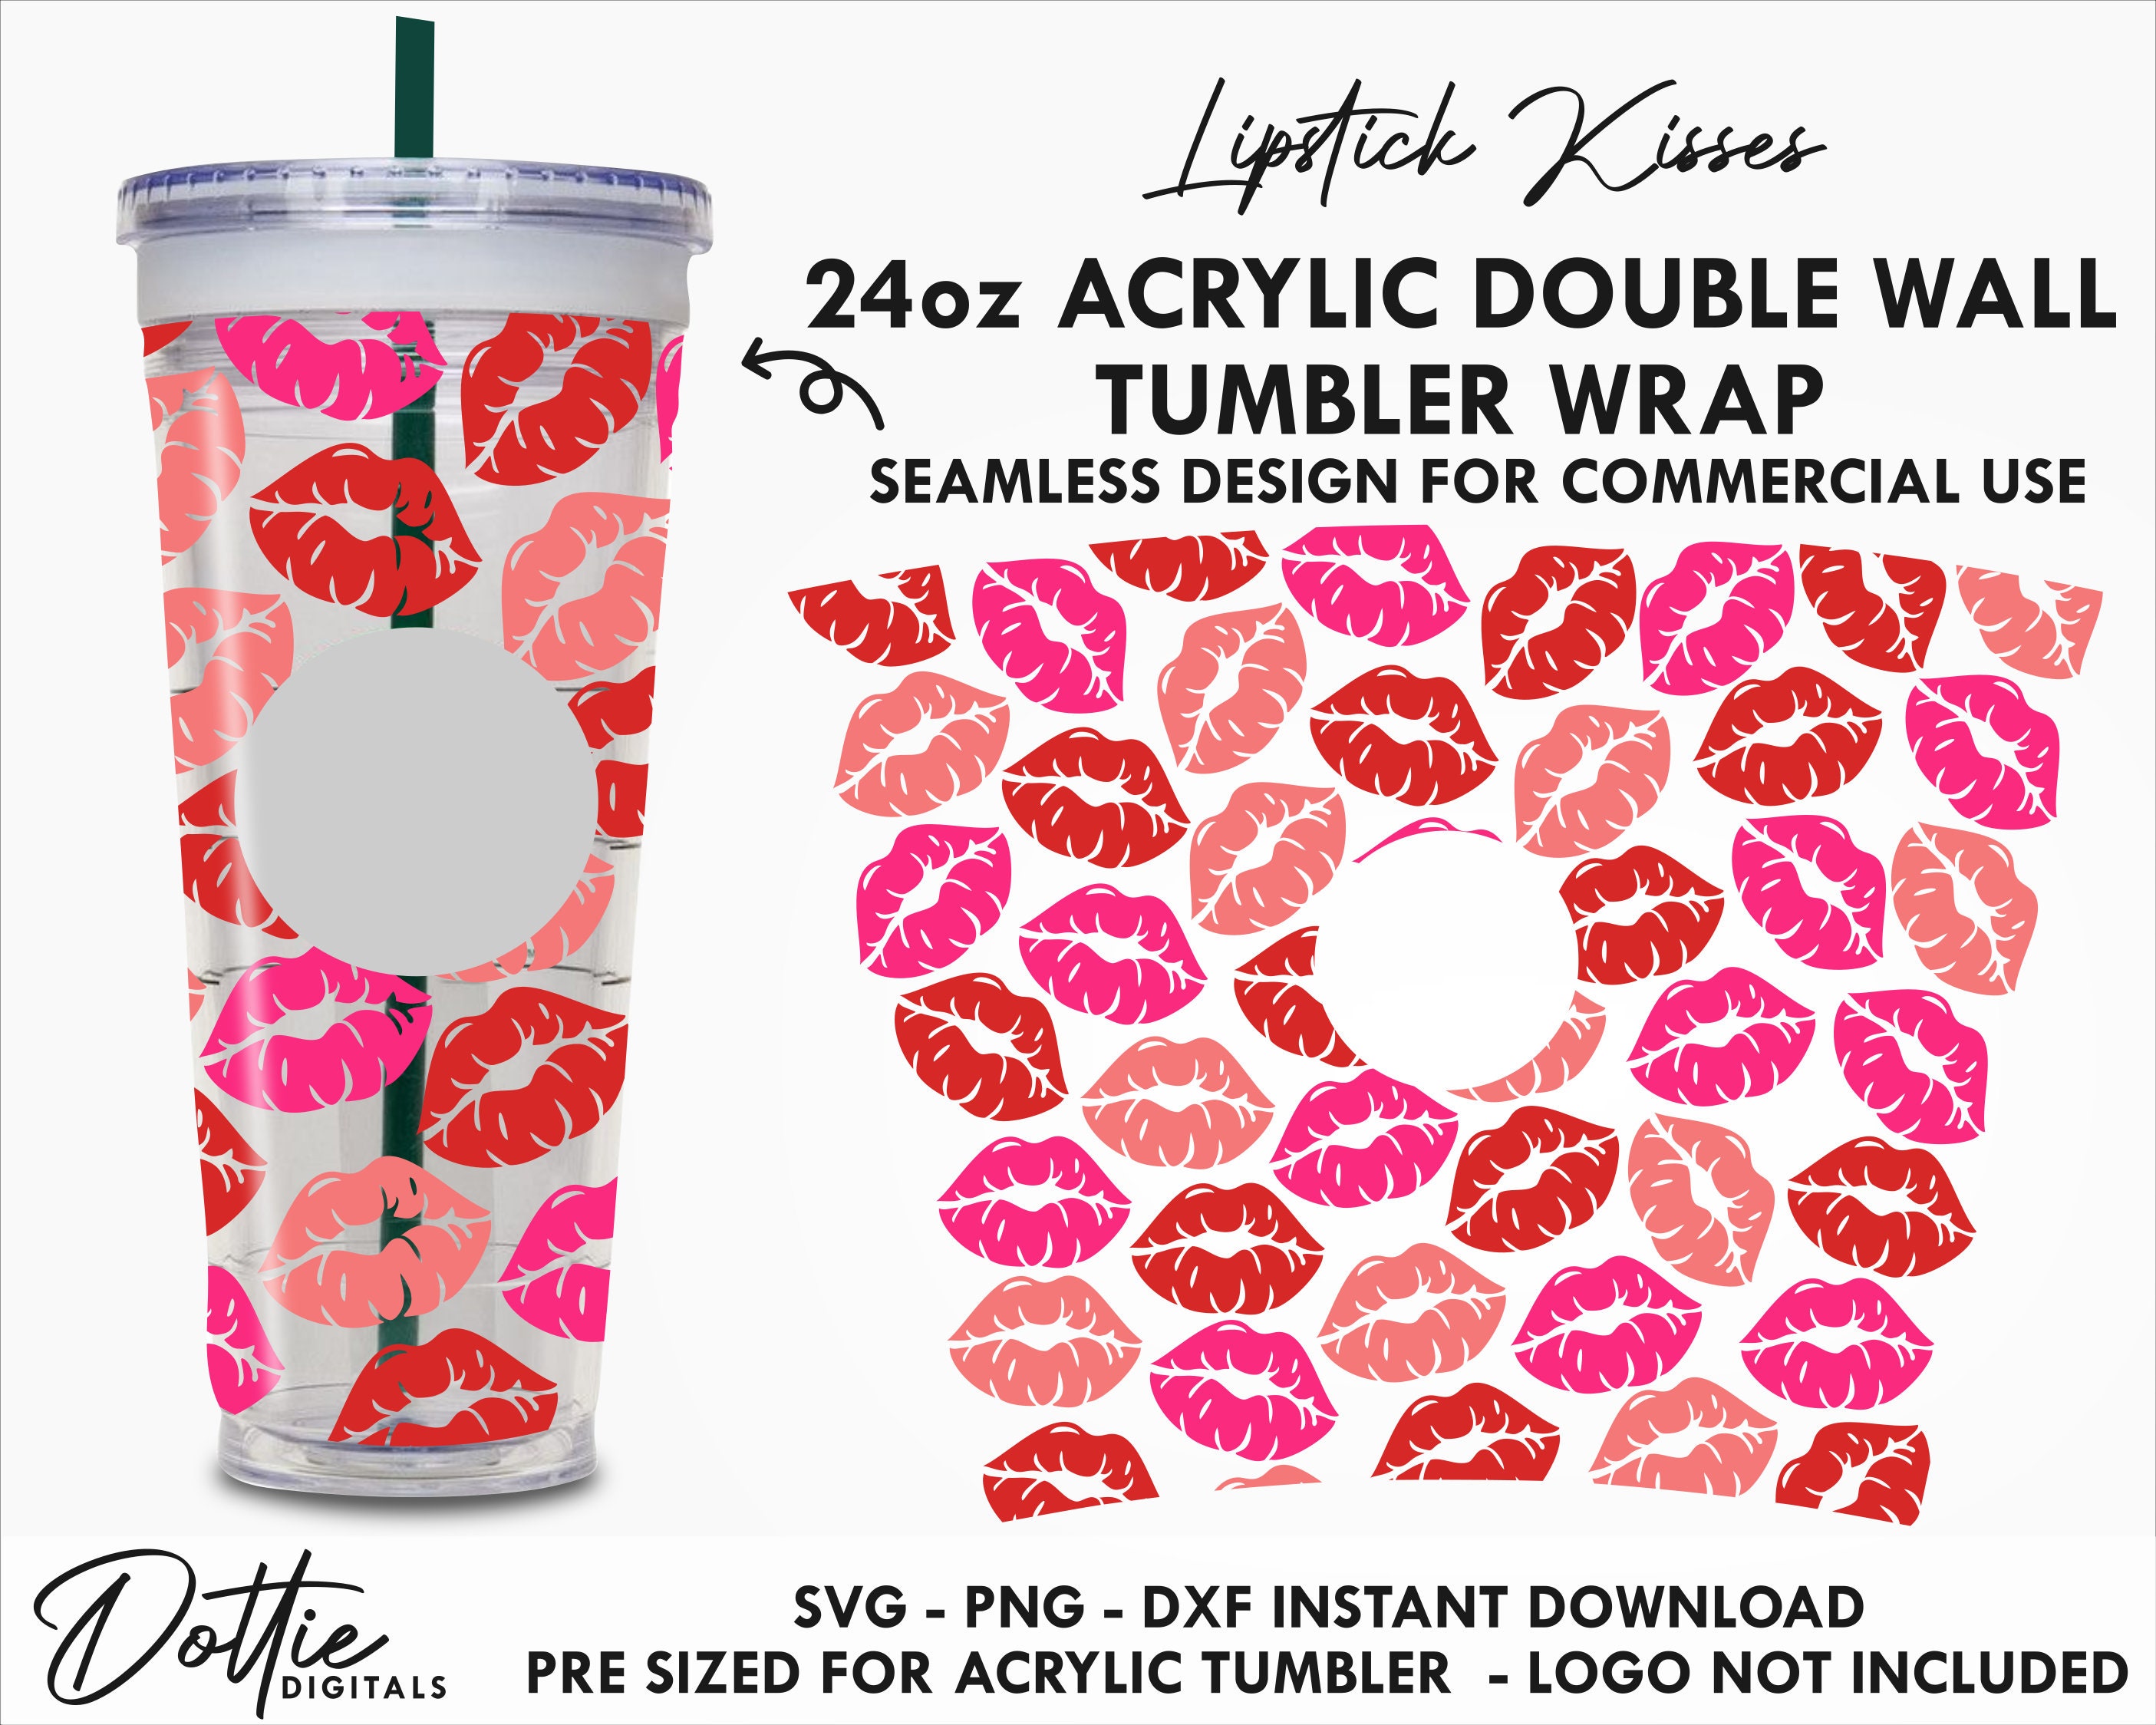 Dottie Digitals - Lucky Shamrocks 24oz Starbucks No Hole Double Wall  Acrylic Tumbler Wrap SVG PNG DXF Cup Cutting File